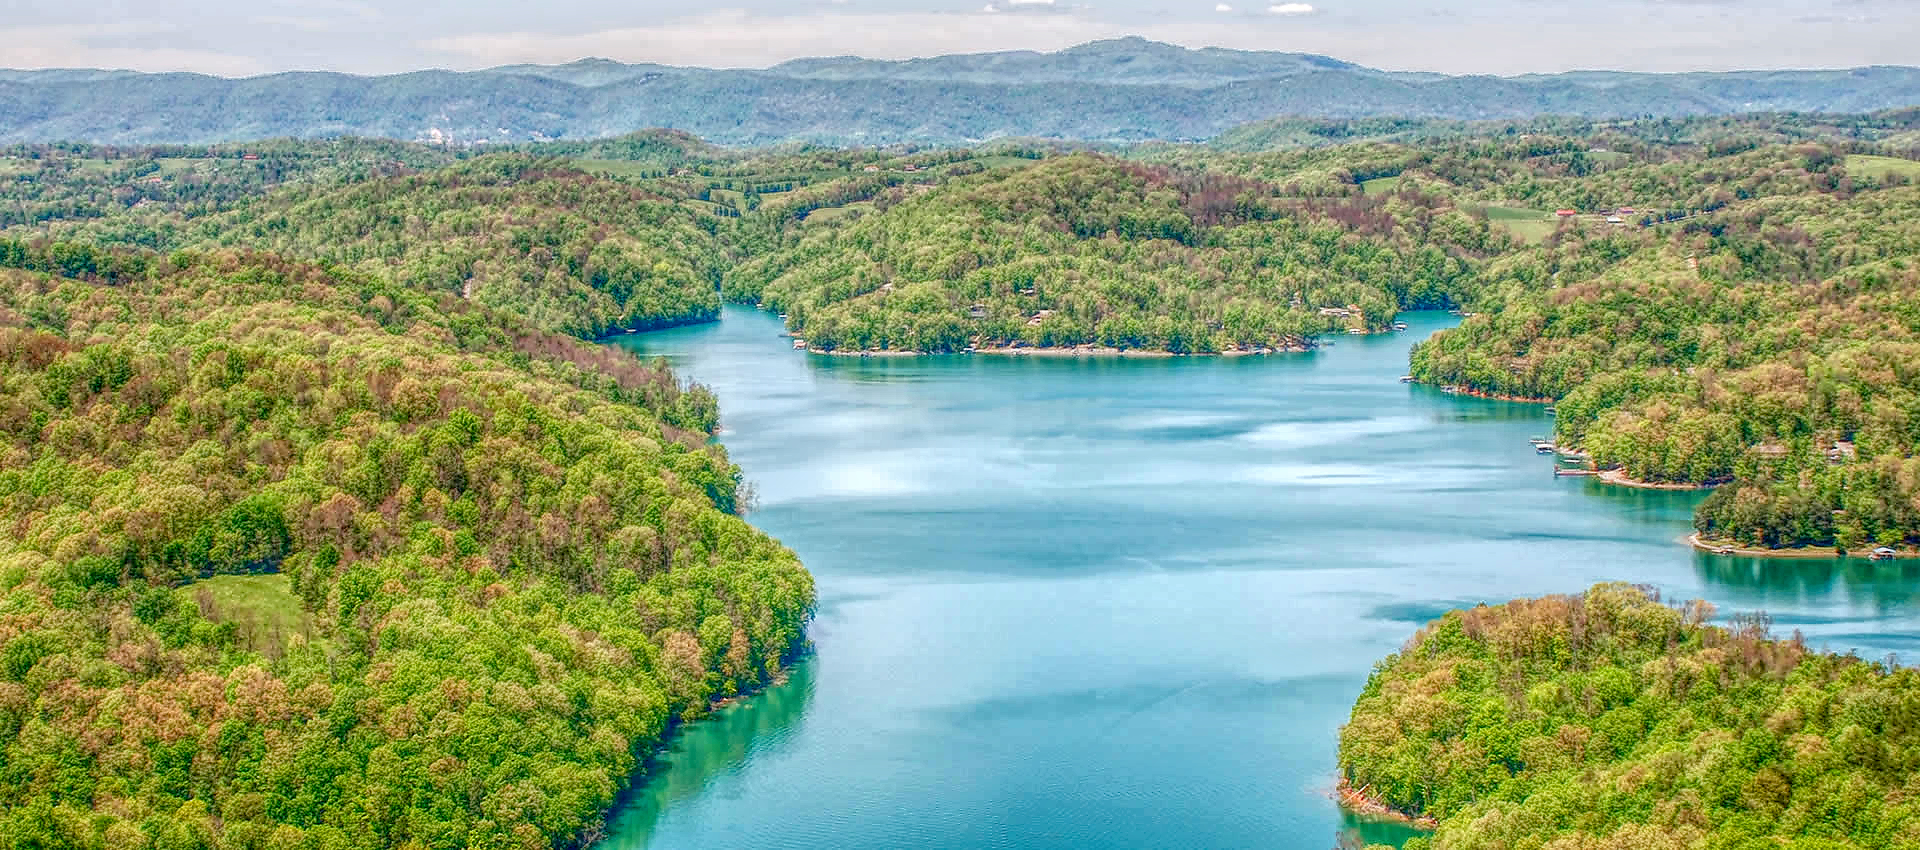 How do you find real estate in Norris Lake?